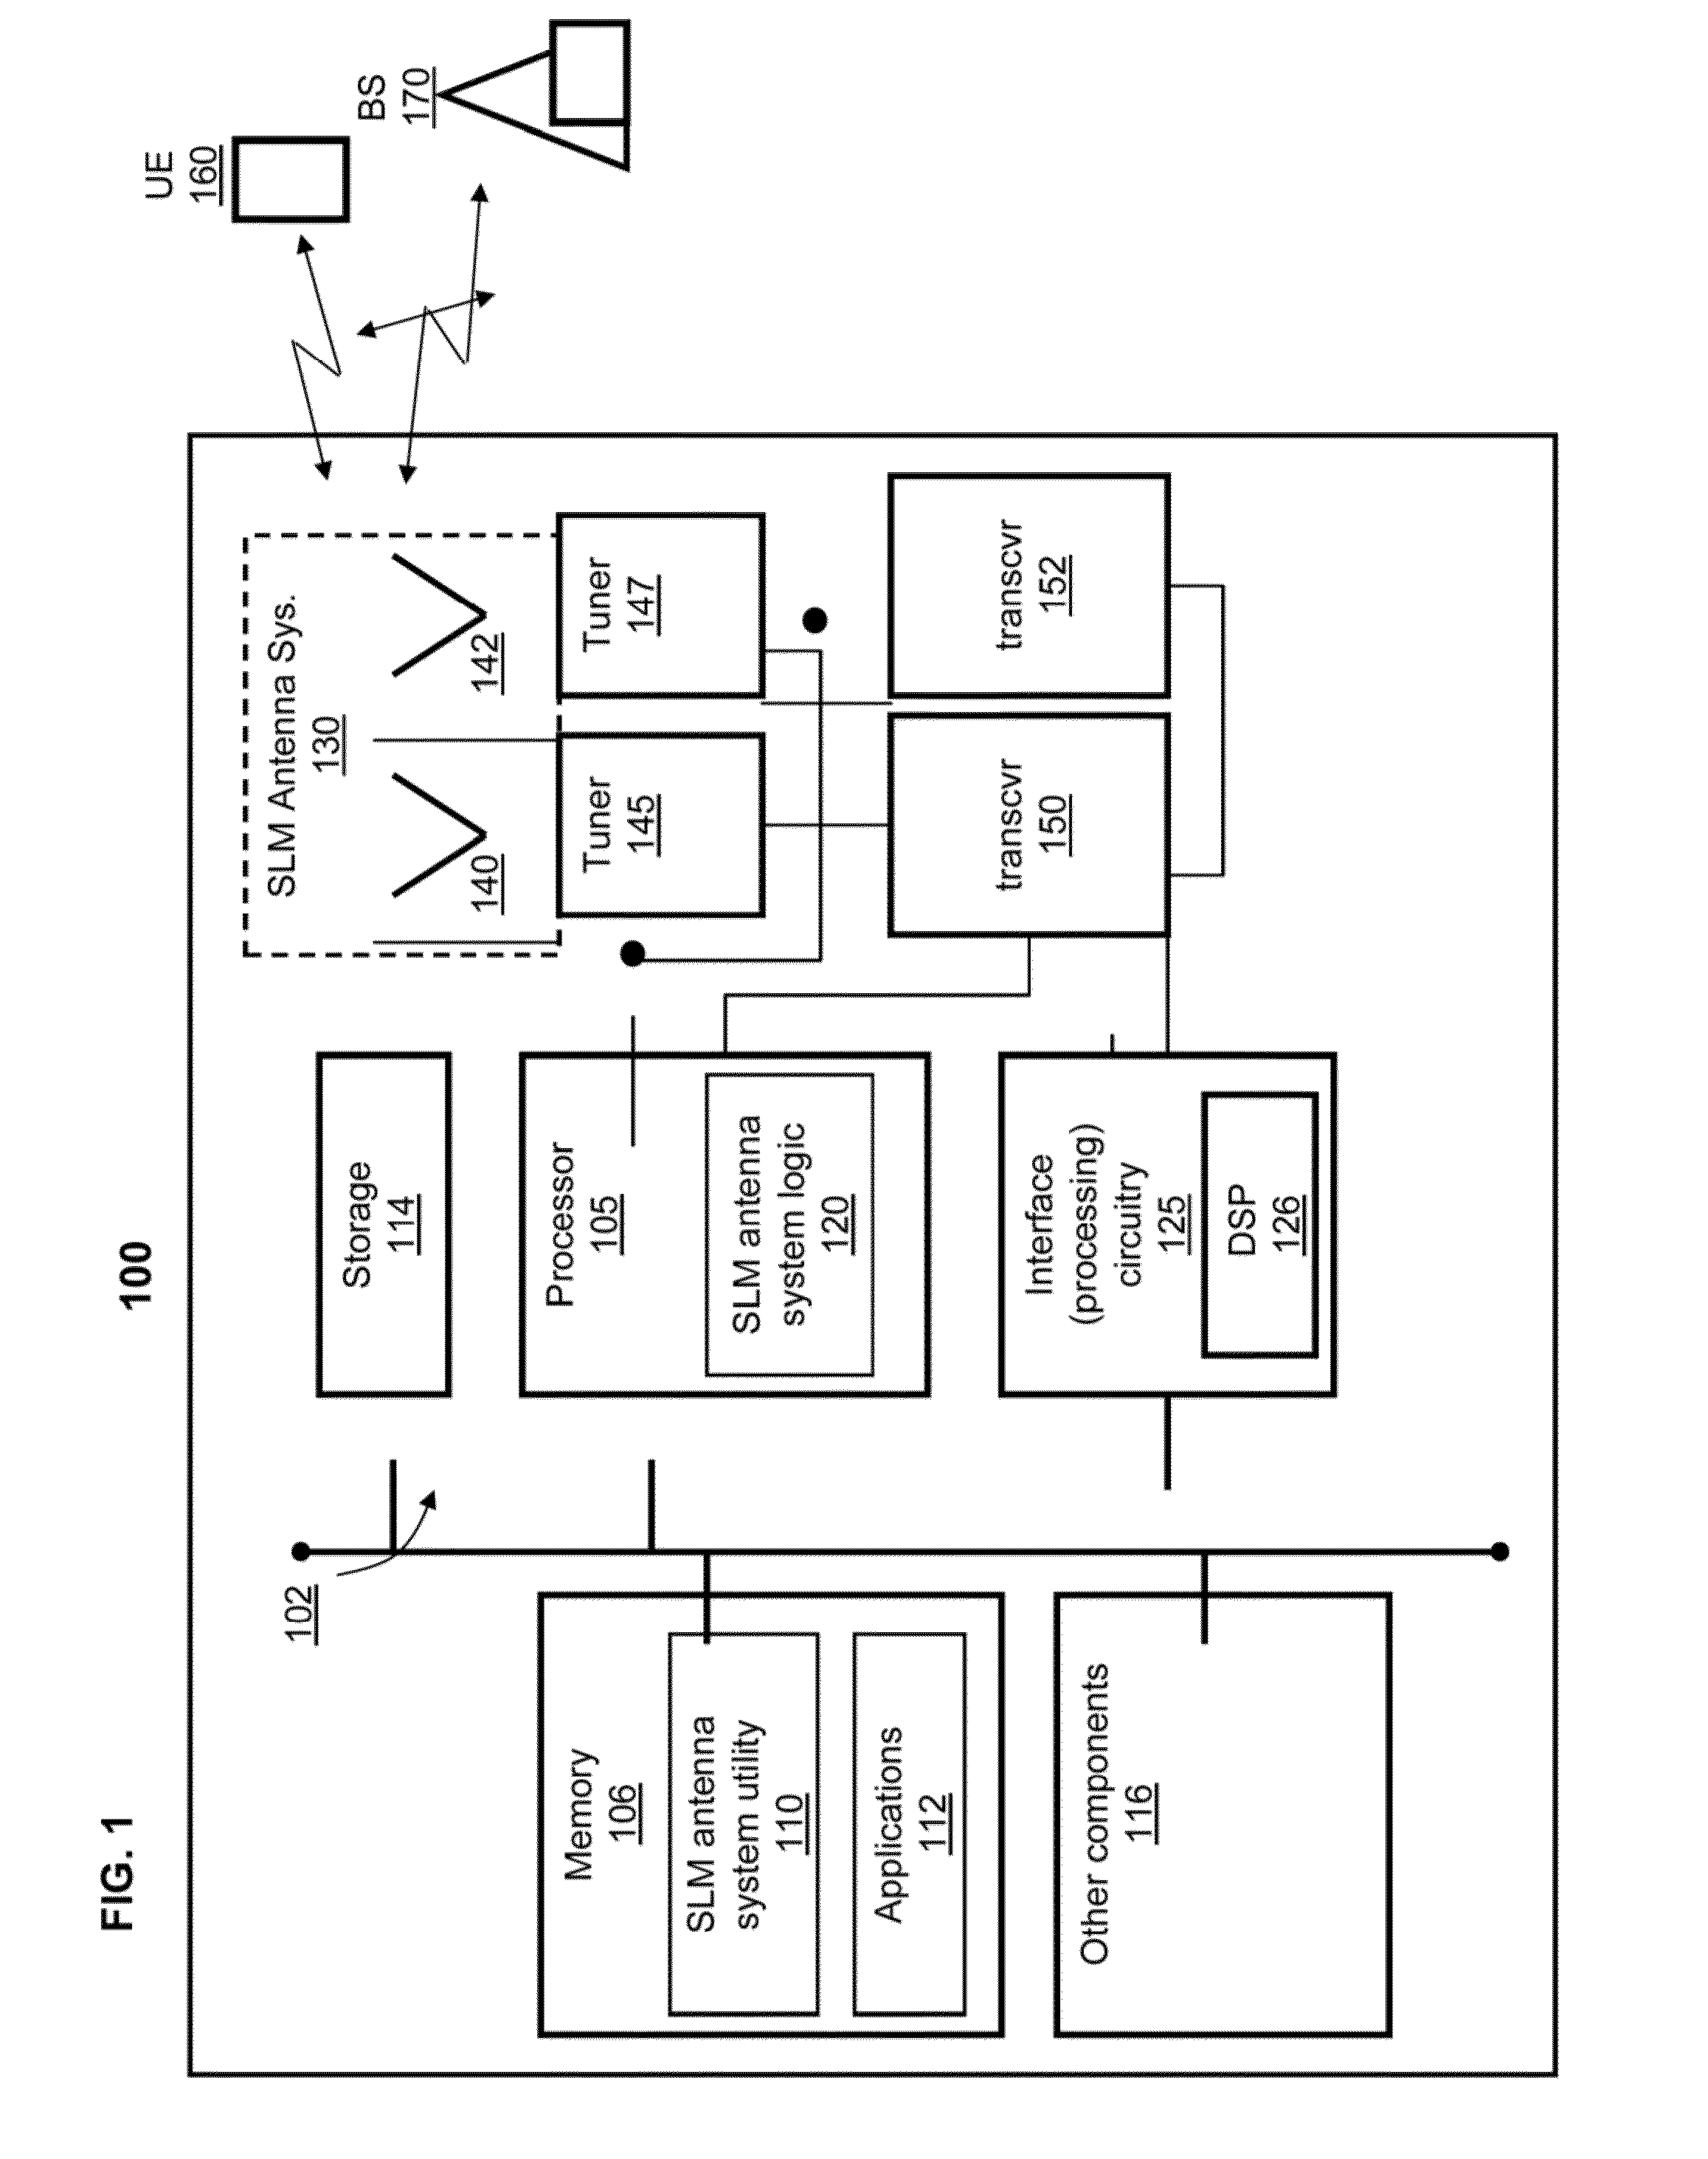 Antenna system for a smart portable device using a continuous metal band